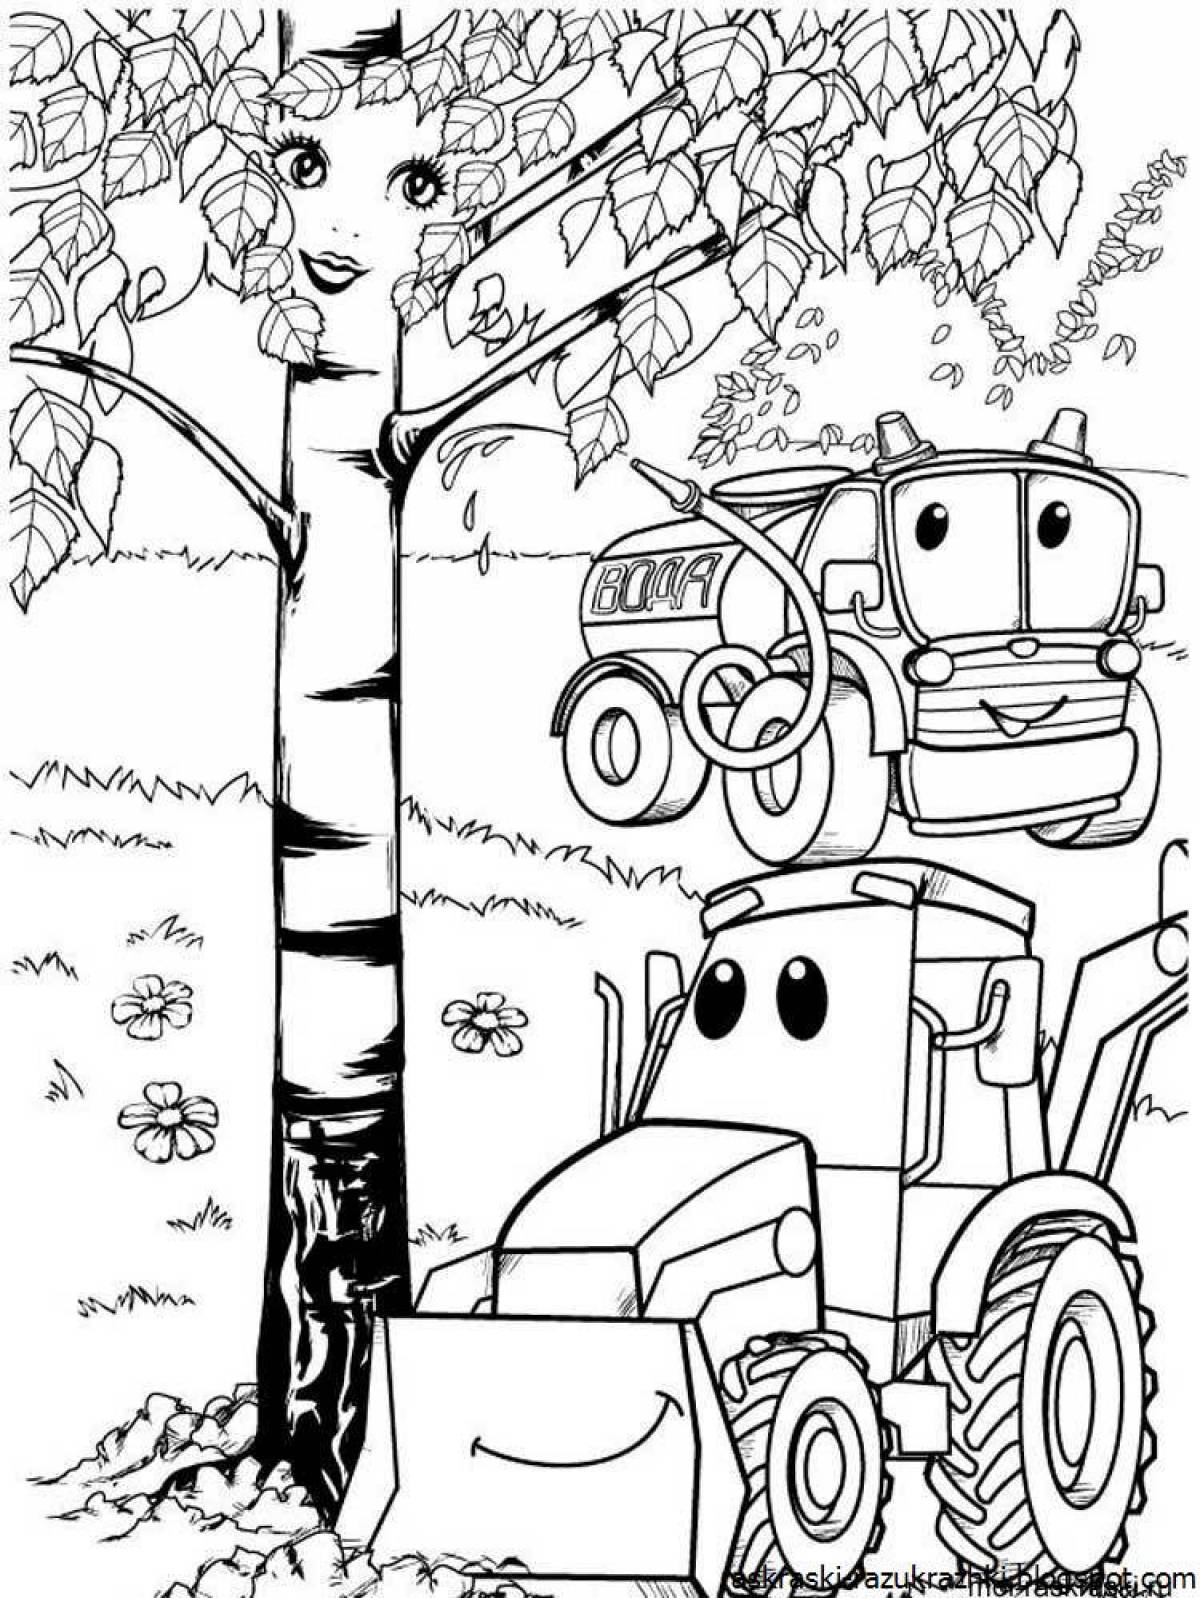 Birch tree coloring book for kids